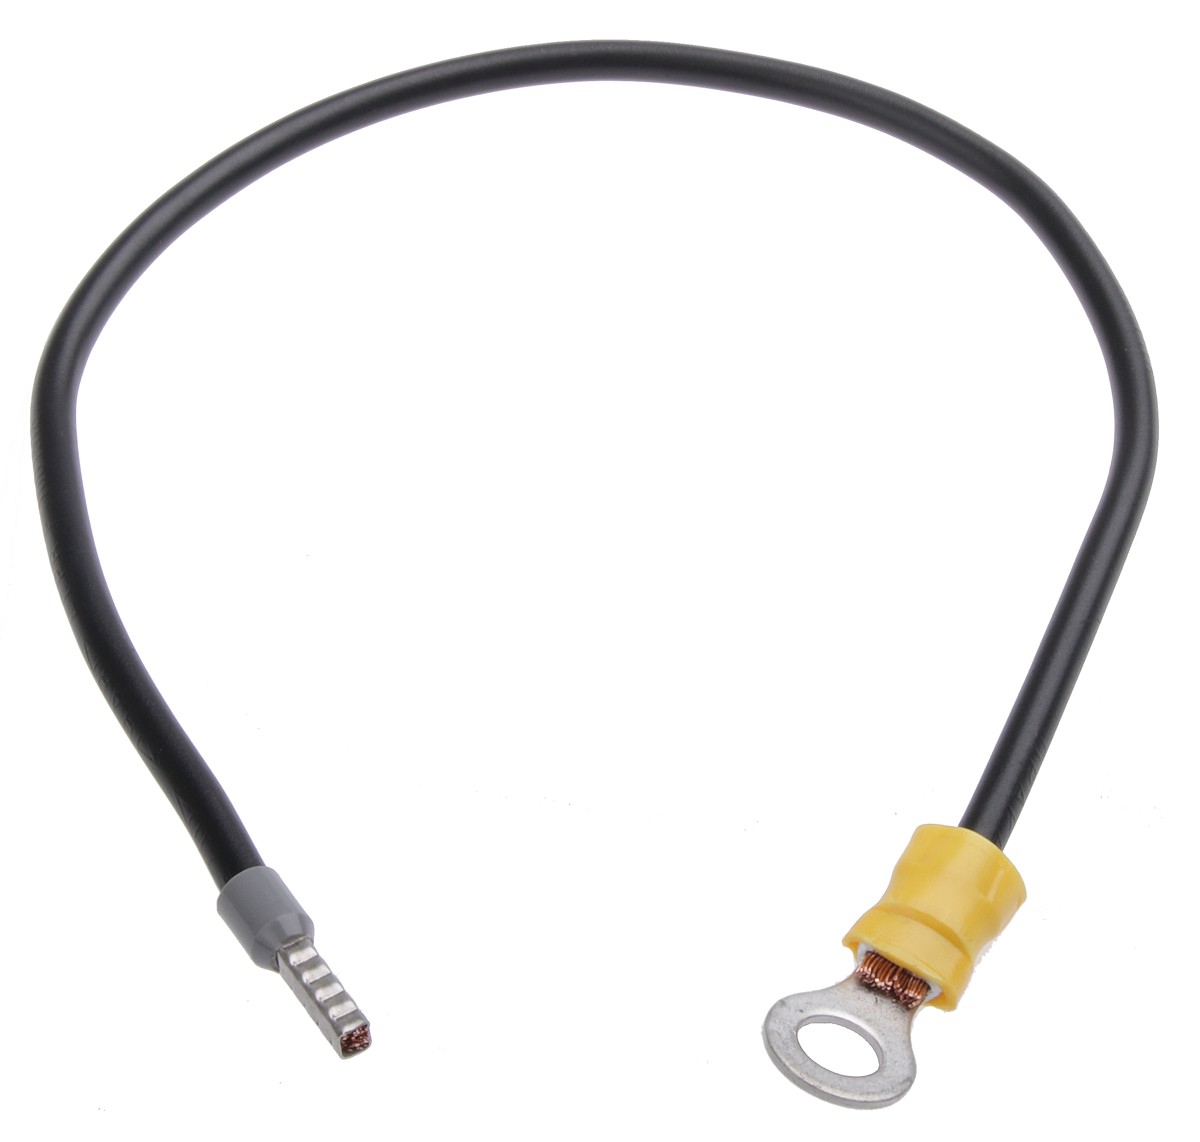 DC-DC cable between battery and power source, 30cm, M8 hole - wire end